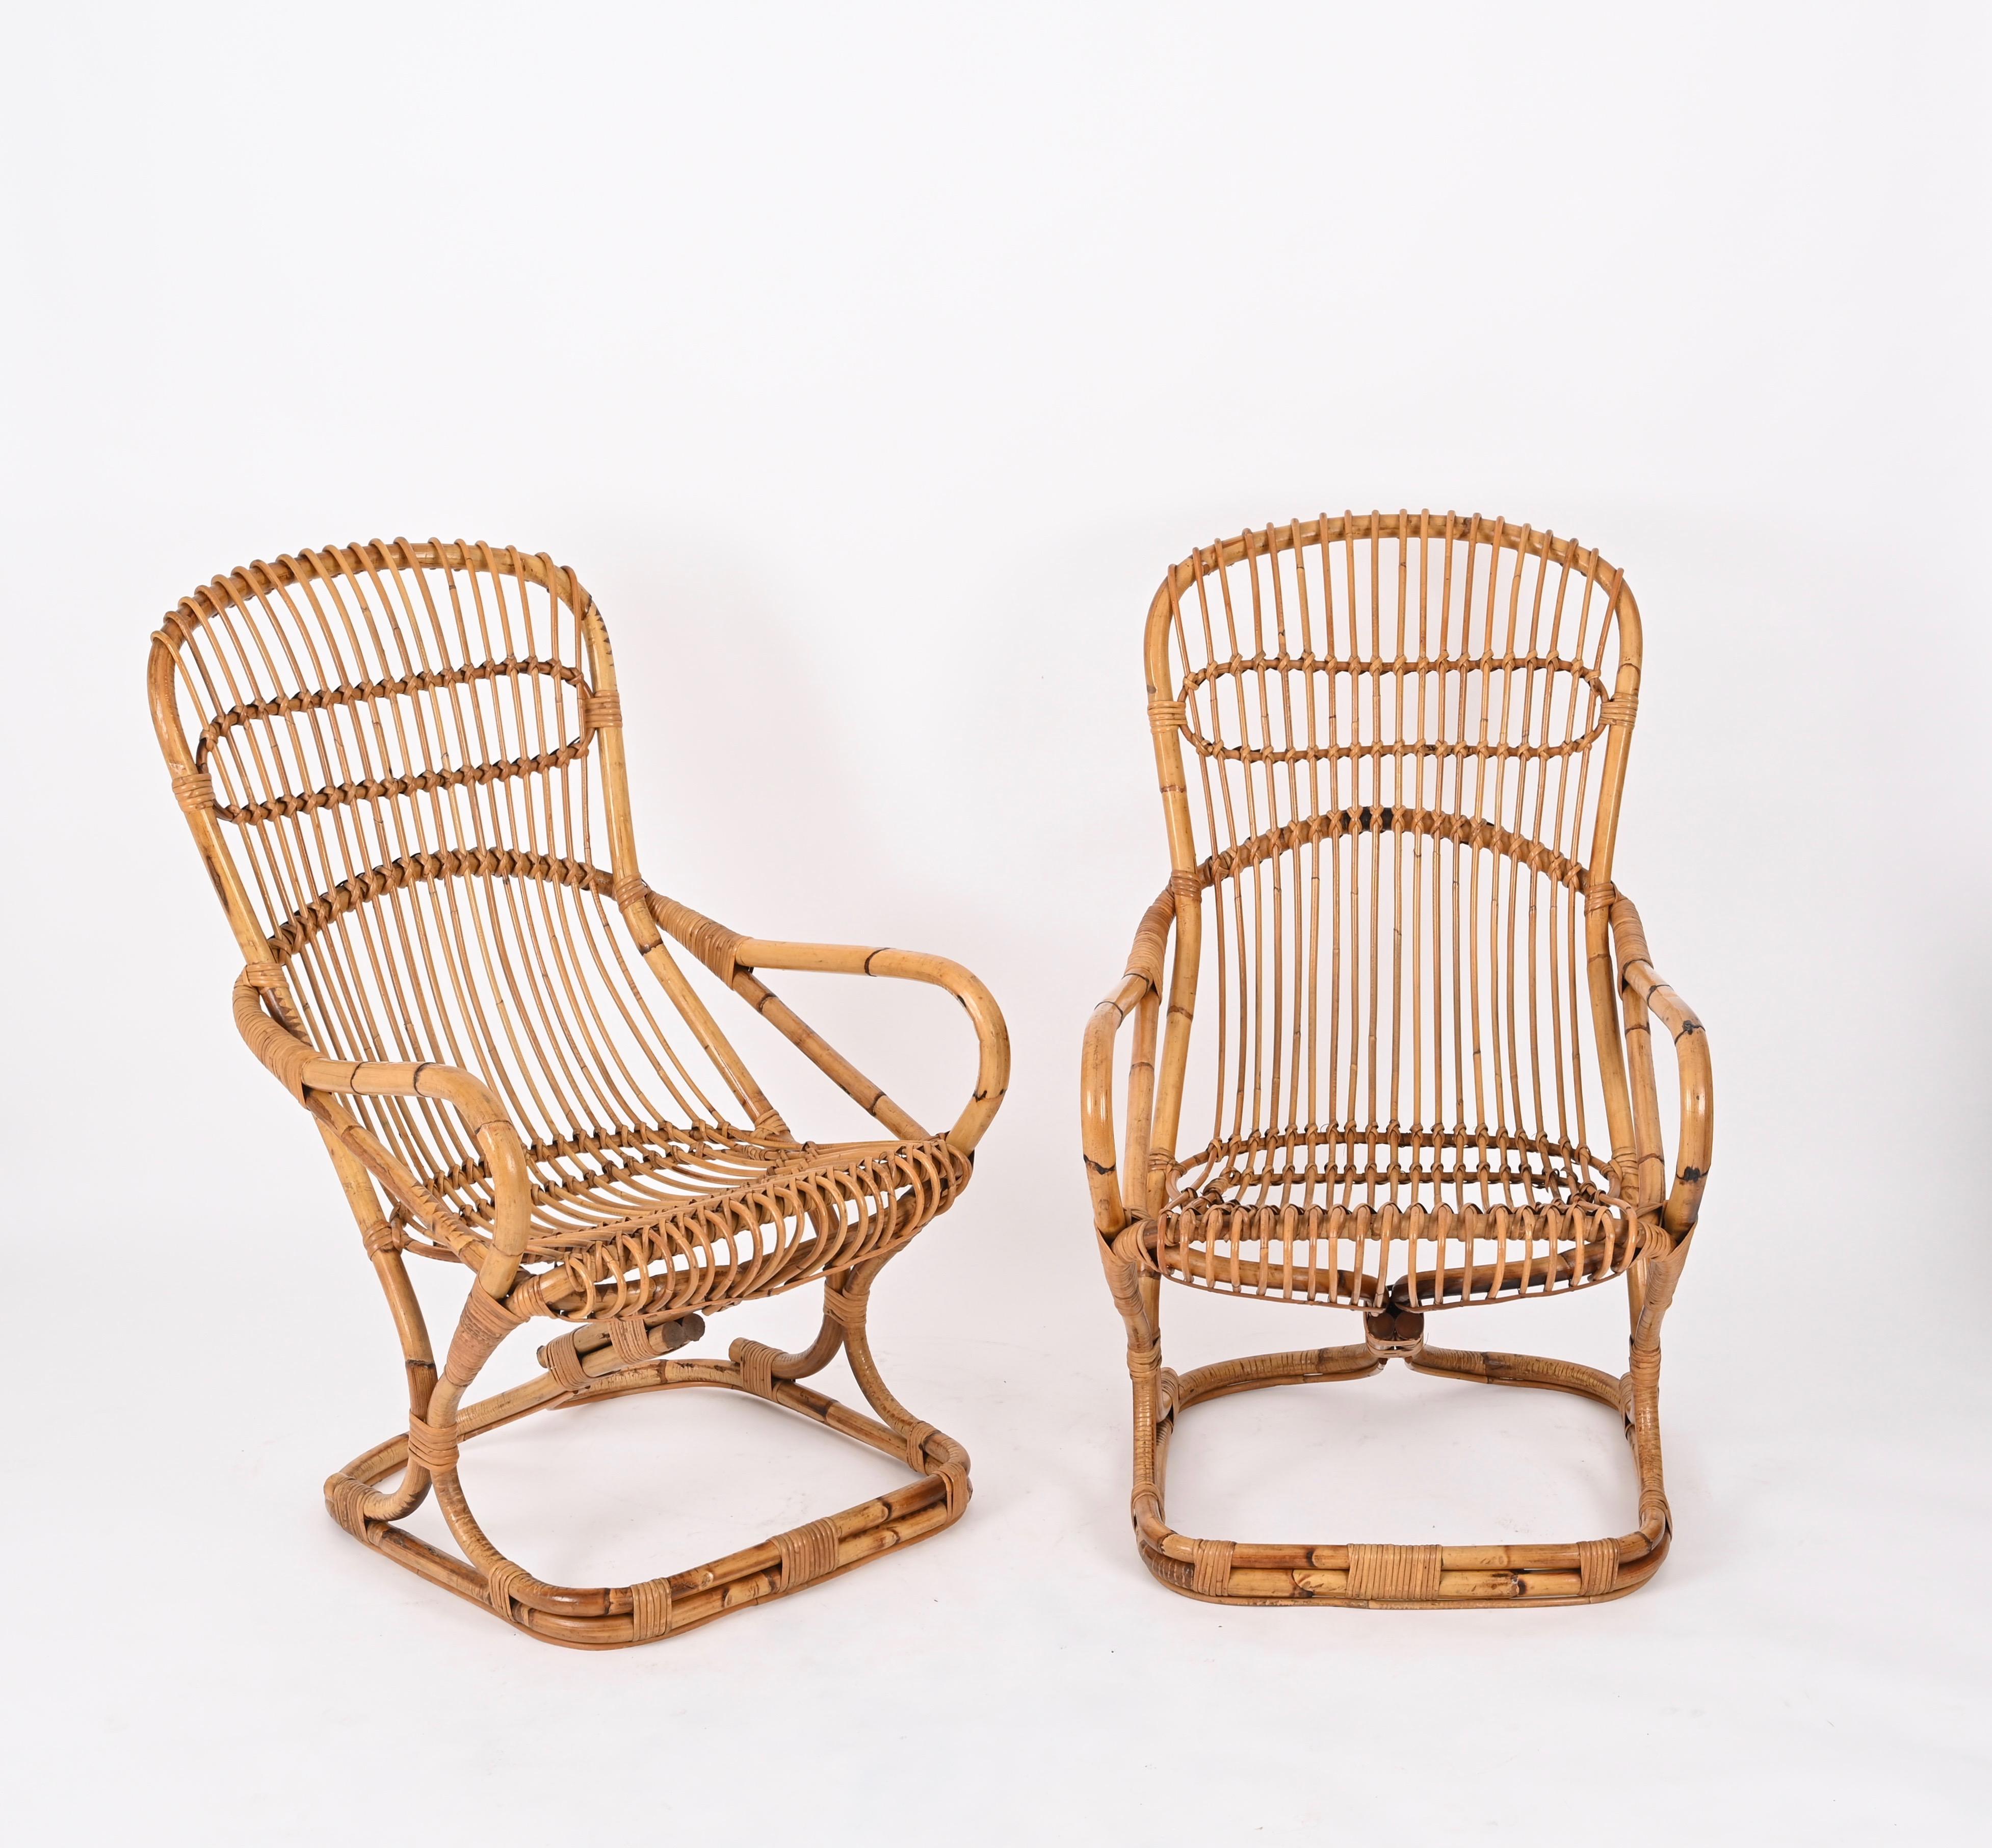 Pair of Midcentury Italian Wicker and Rattan Armchairs by Tito Agnoli, 1960s For Sale 7